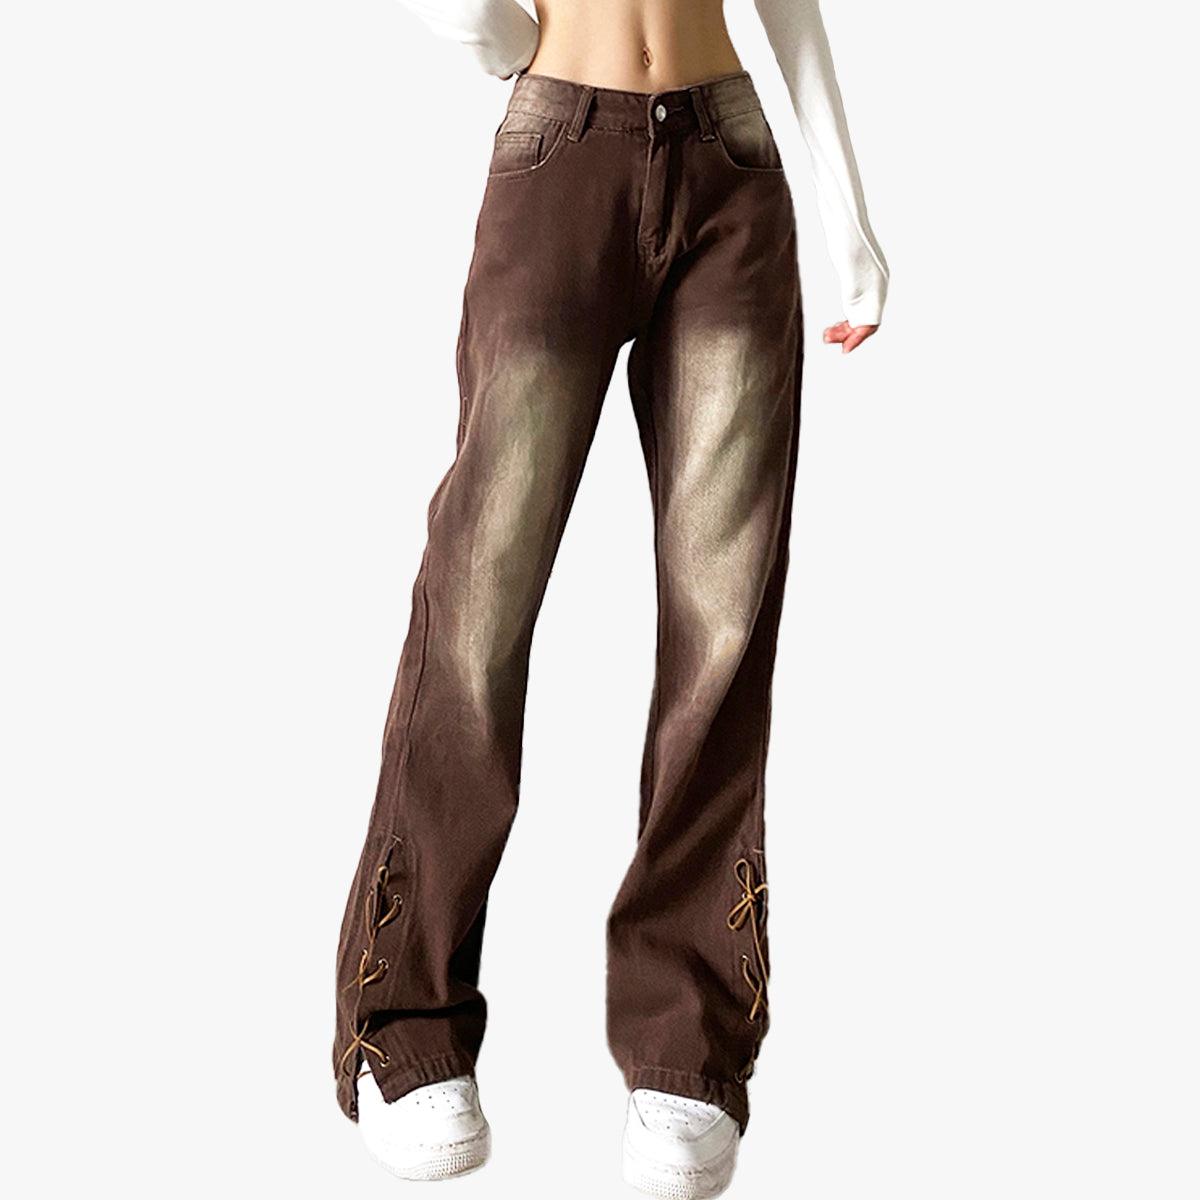 Retro Washed Brown Low Waist Jeans - Aesthetic Clothes Shop